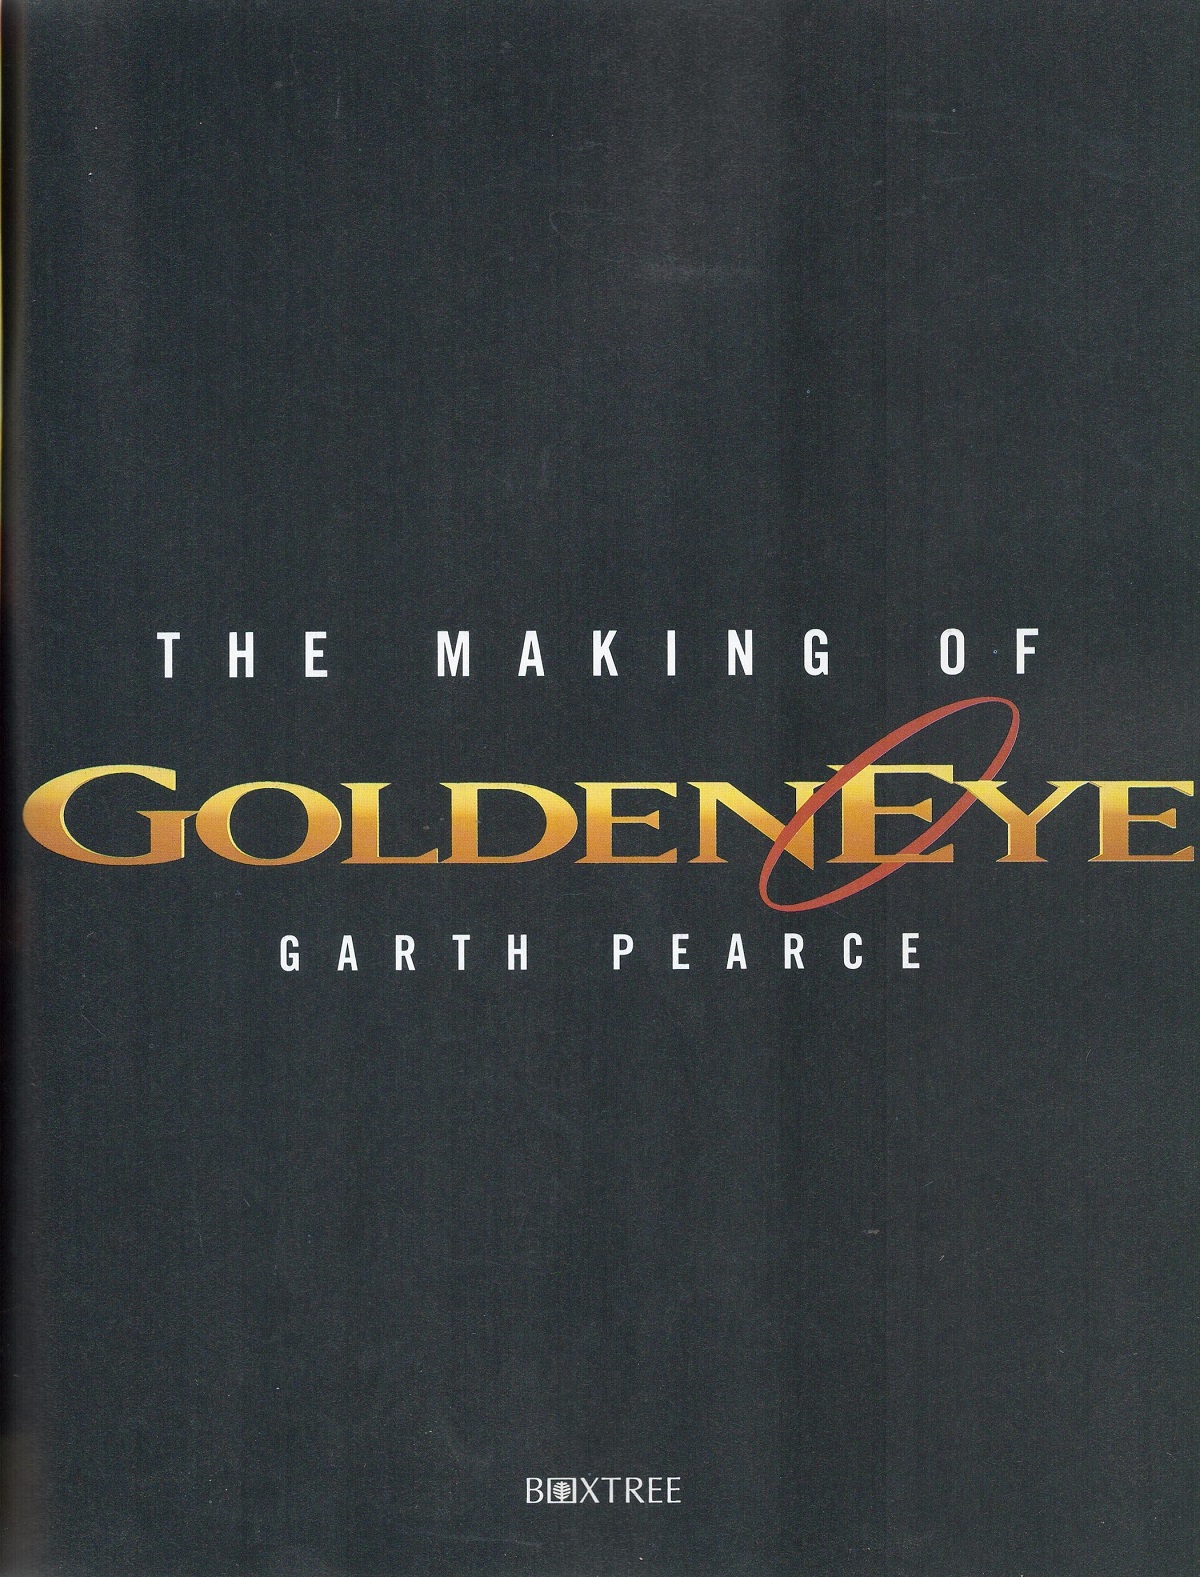 James Bond The Making of Goldeneye by Garth Pearce Softback Book 1995 First Edition published by